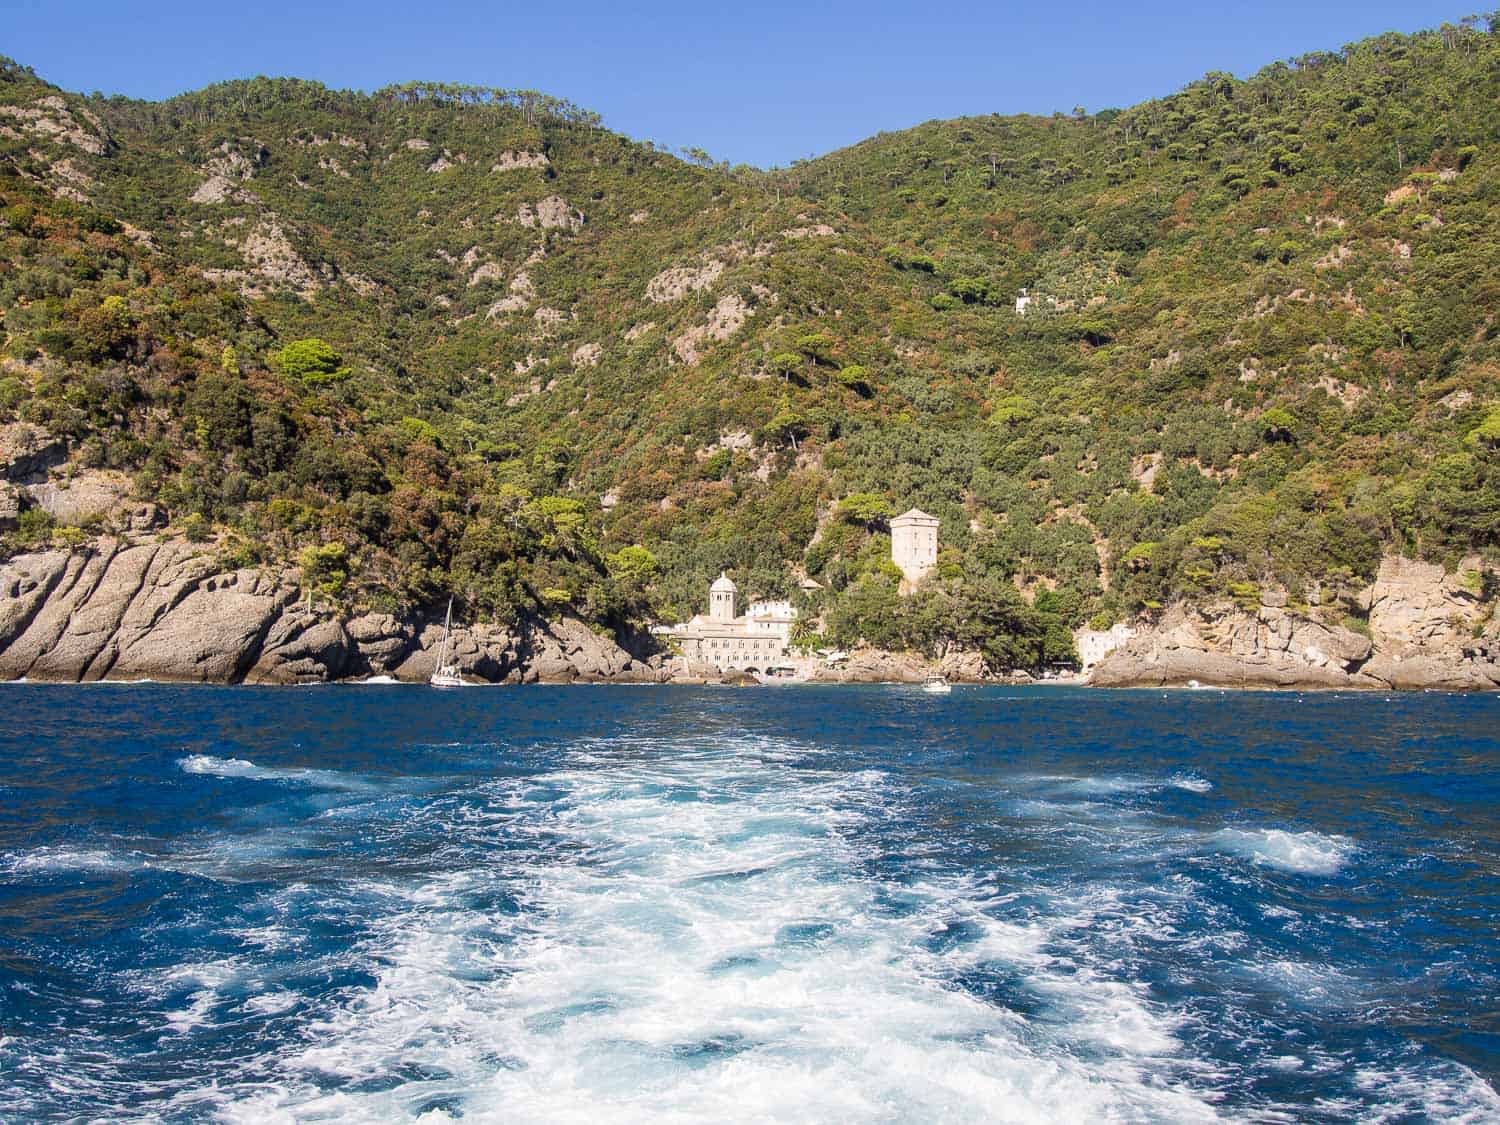 Hiking from Camogli to San Fruttuoso: Everything You Need to Know